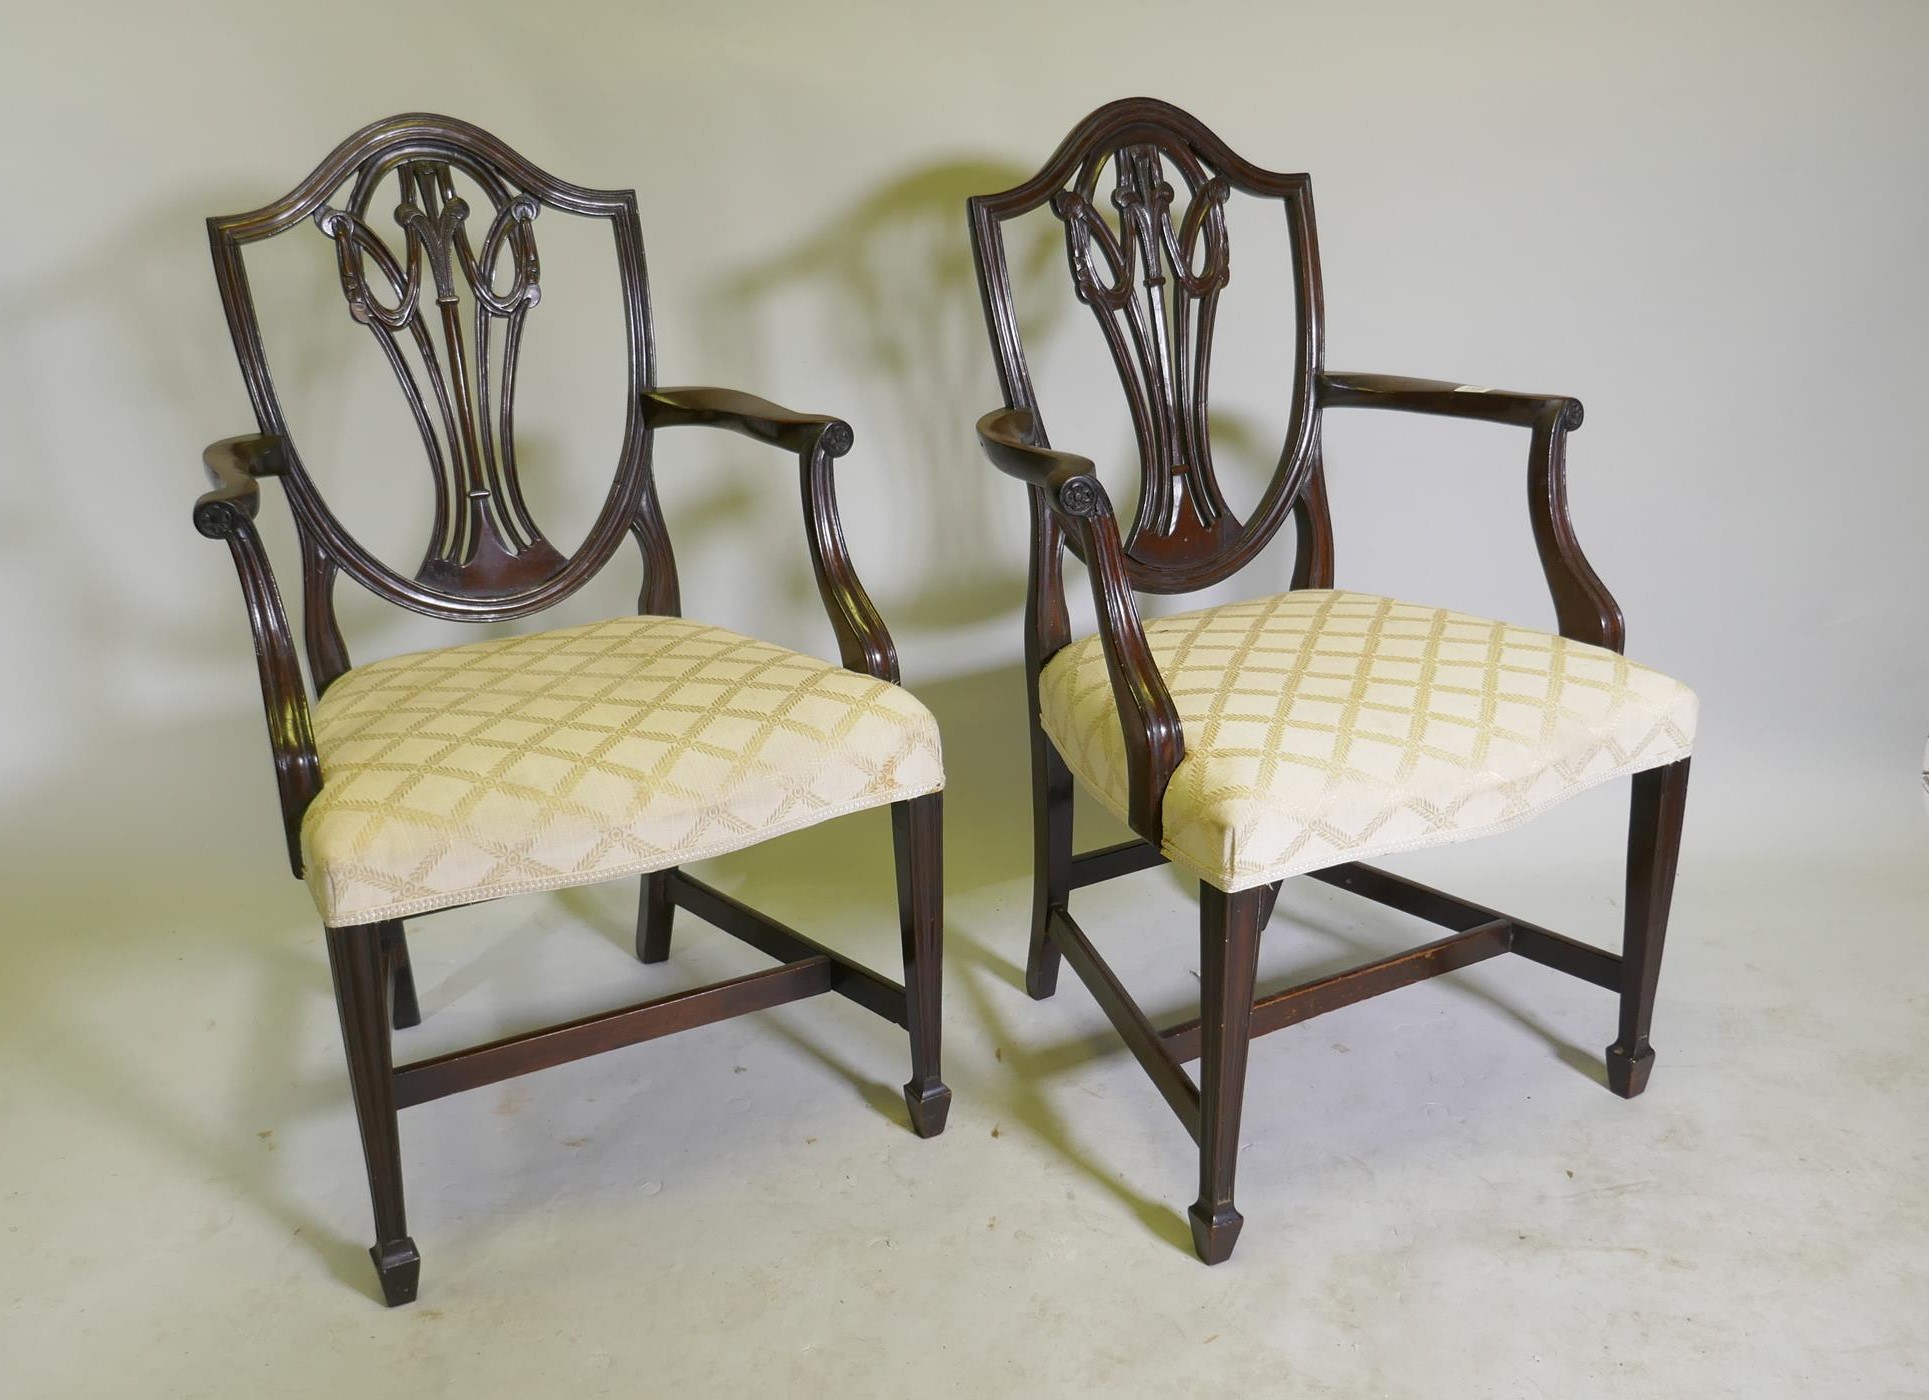 A pair of Hepplewhite style shield back mahogany elbow chairs, late C19th/early C20th